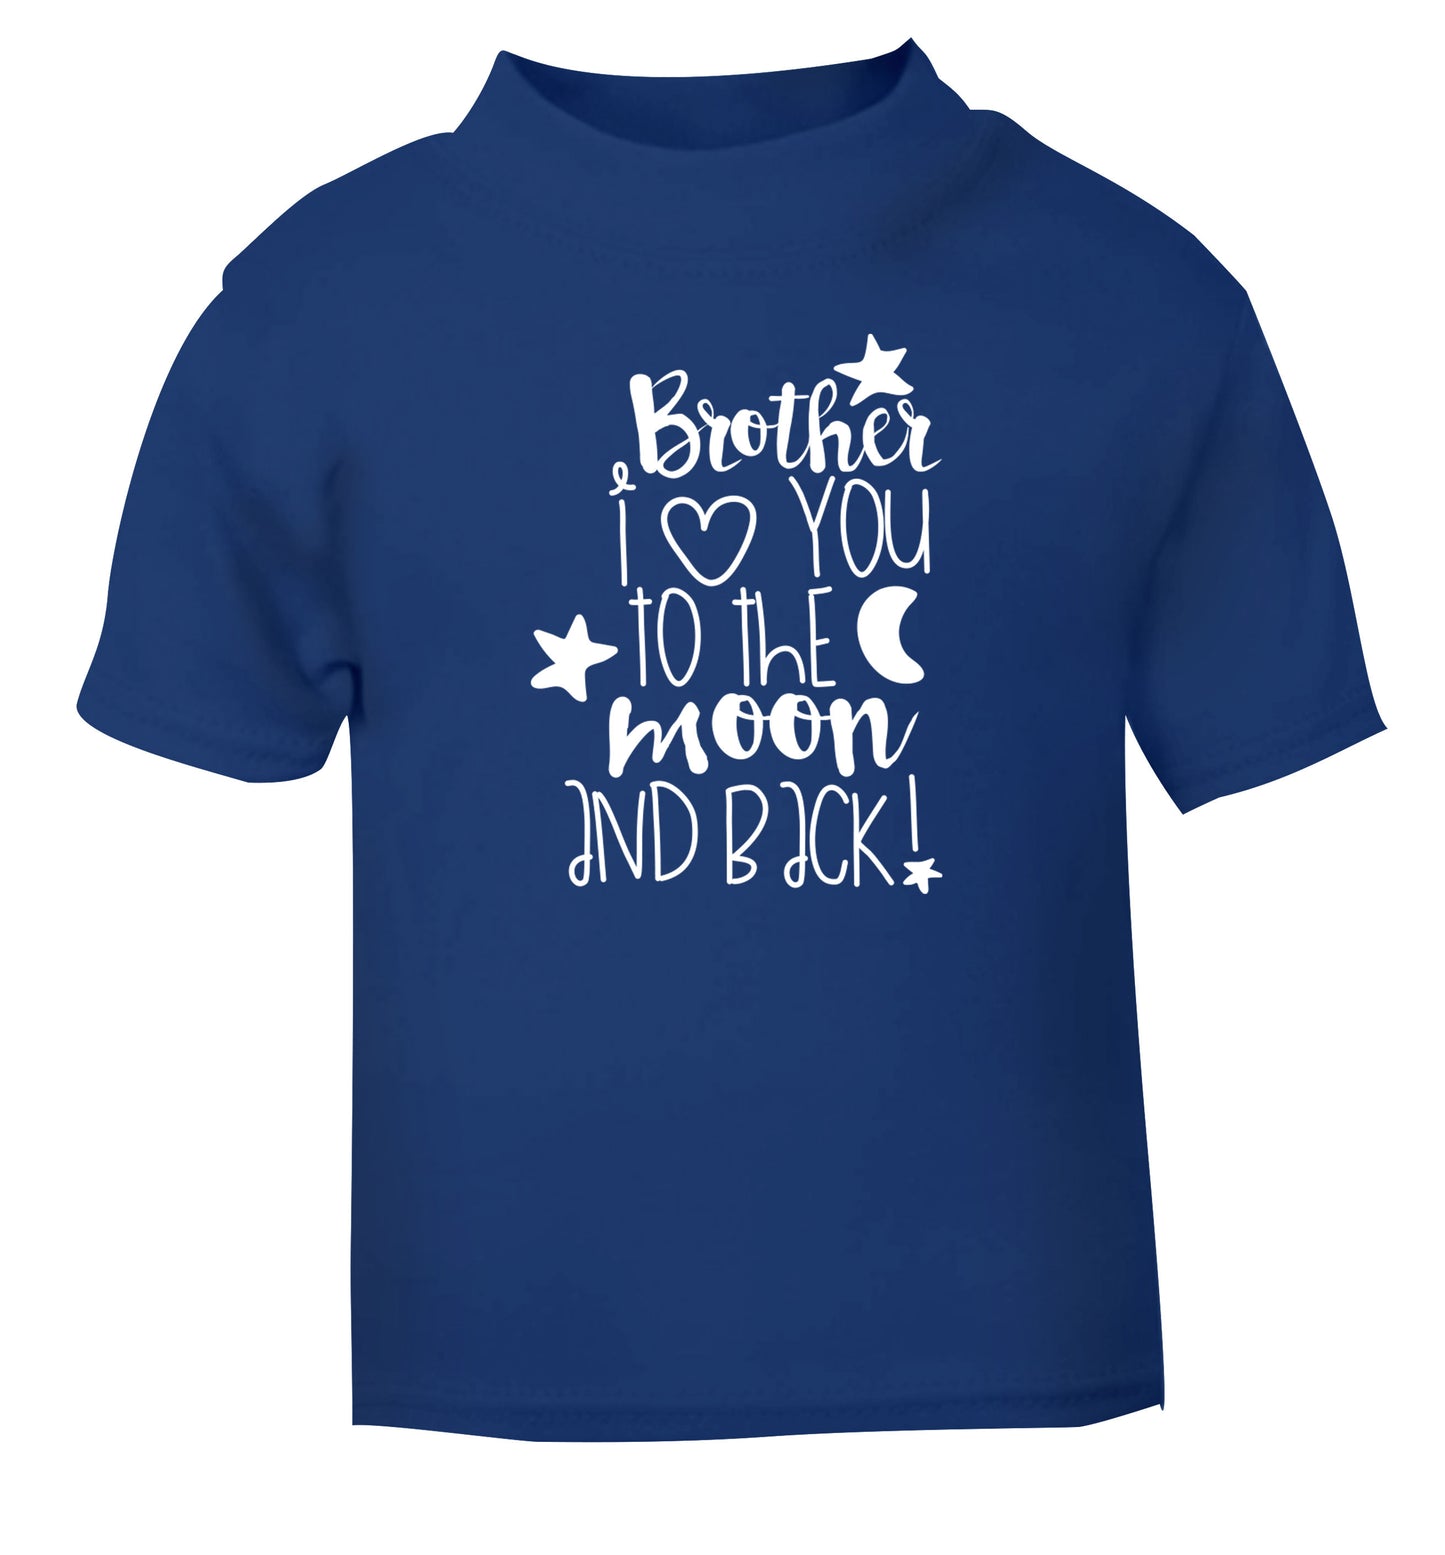 Brother I love you to the moon and back blue Baby Toddler Tshirt 2 Years